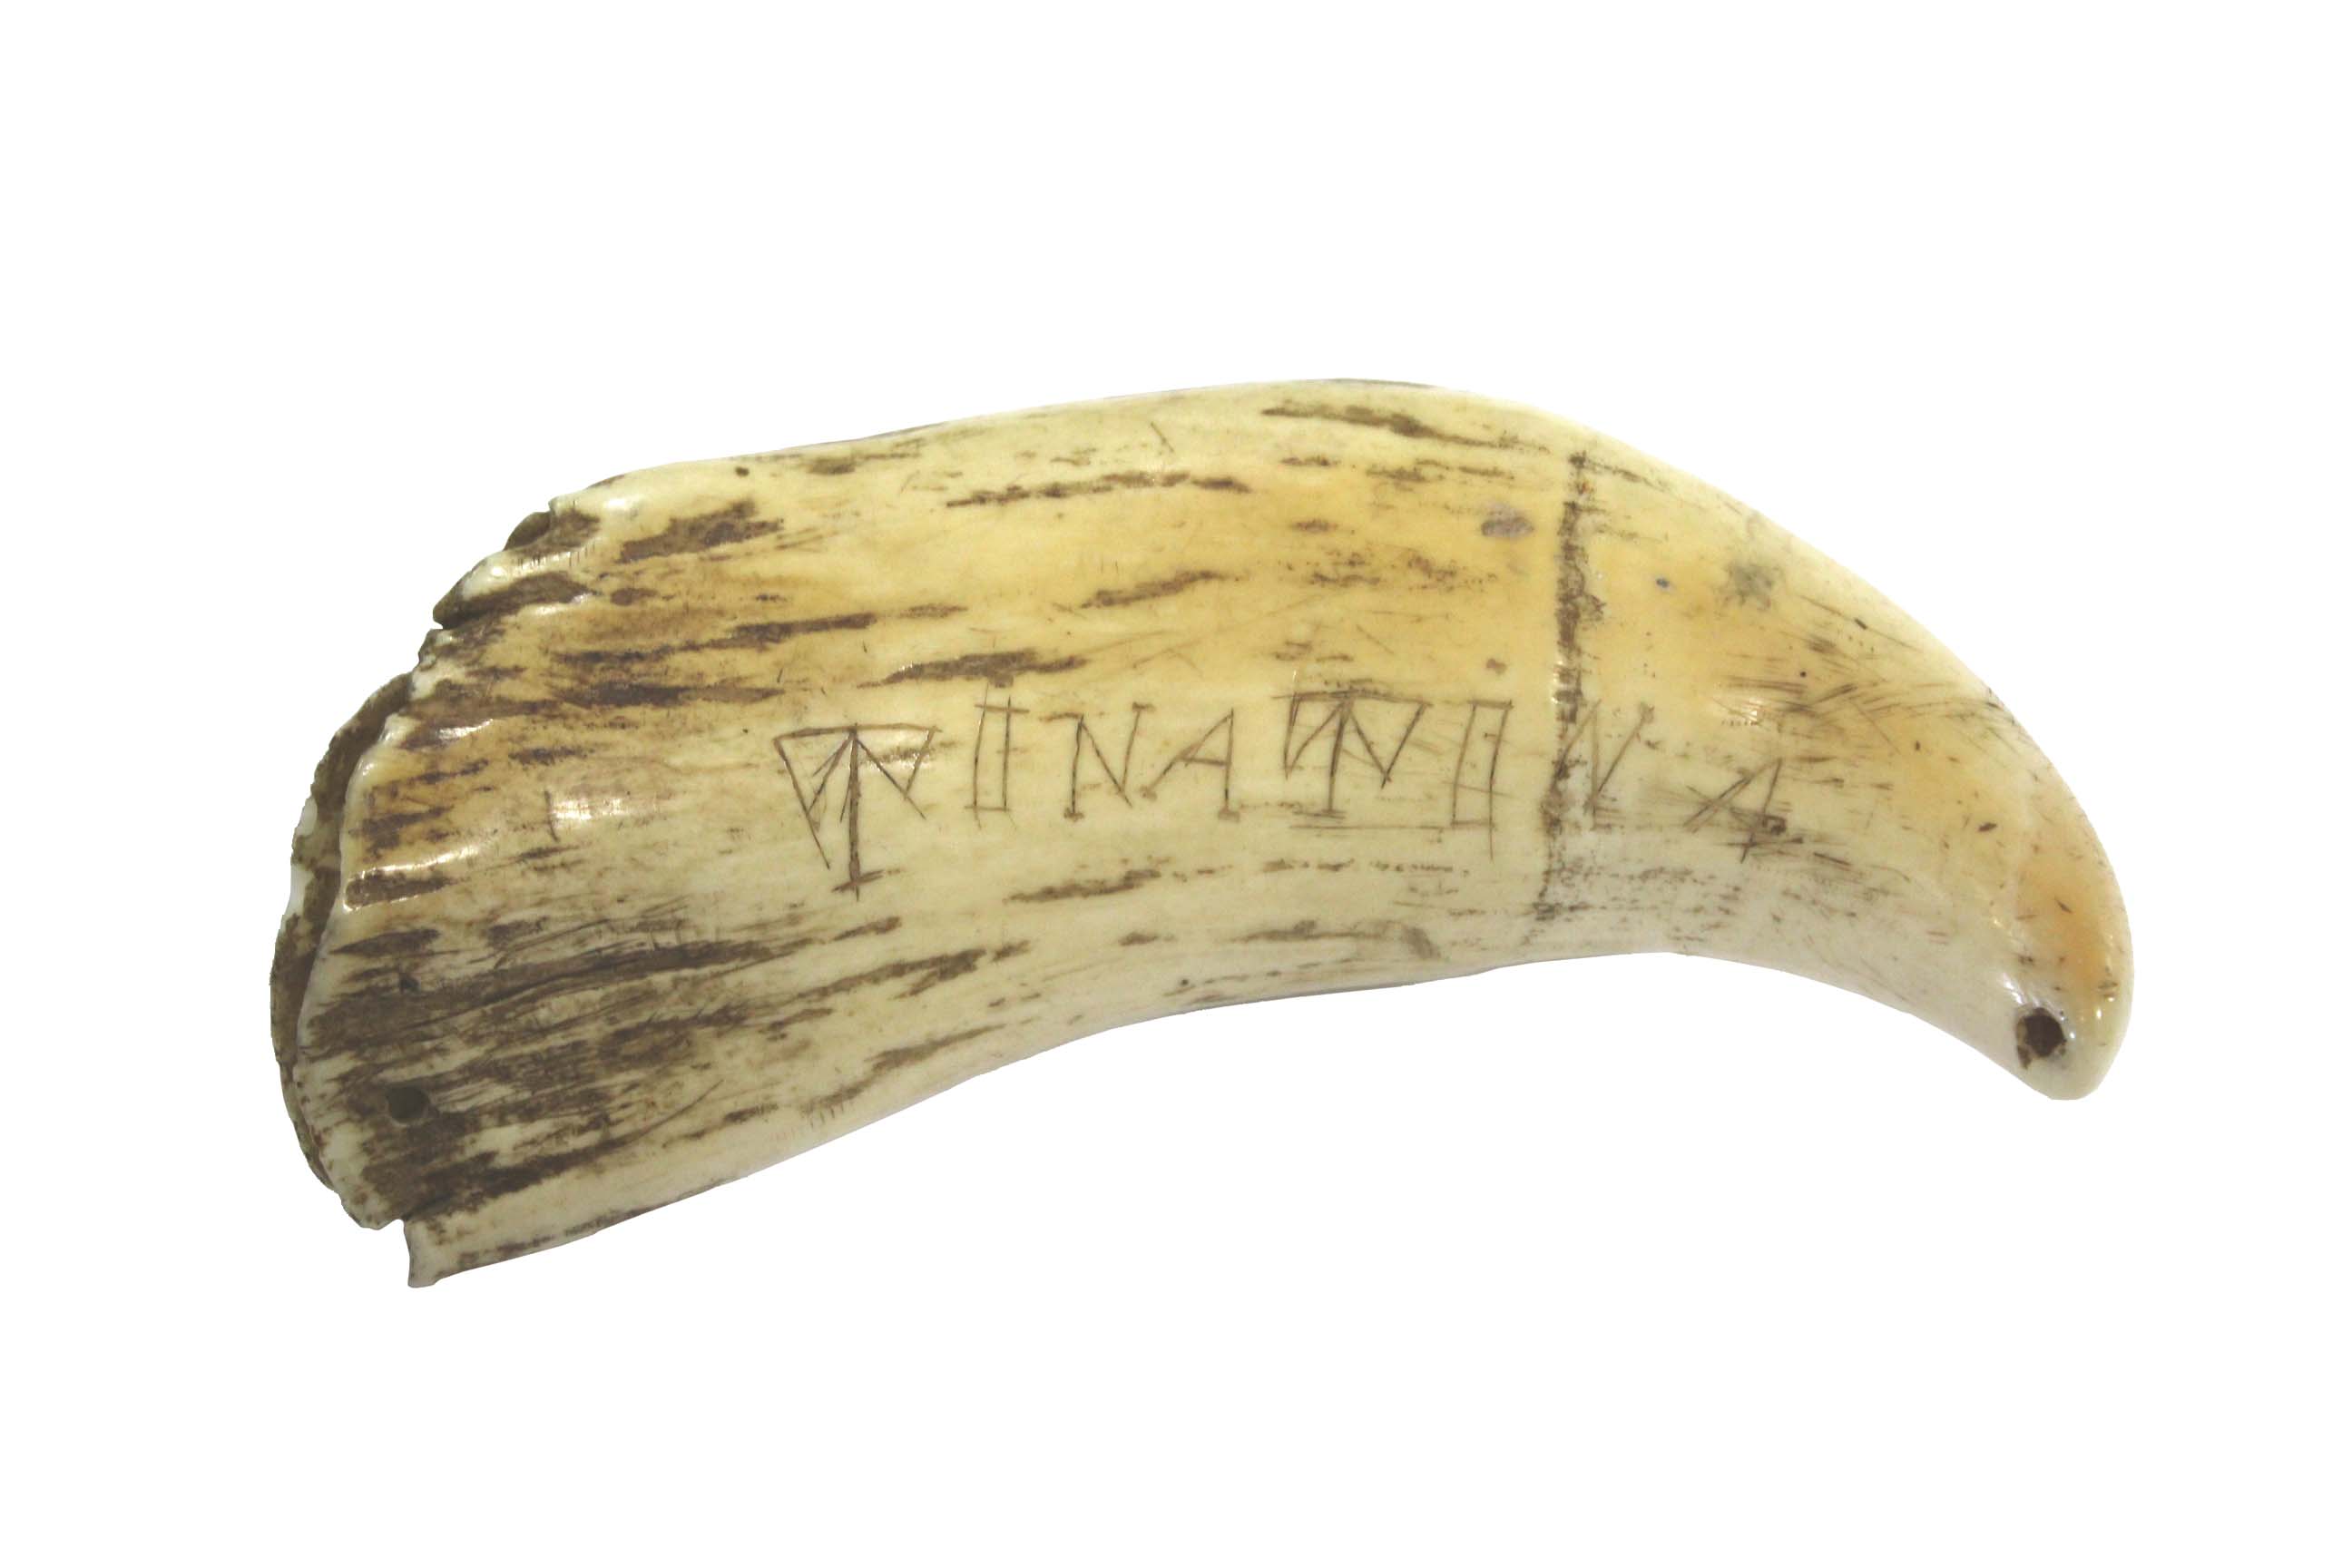 SCRIMSHAW SPERM WHALE TOOTH - SOUTH SEA ISLANDS probably Fijian or Samoan, carved with the word